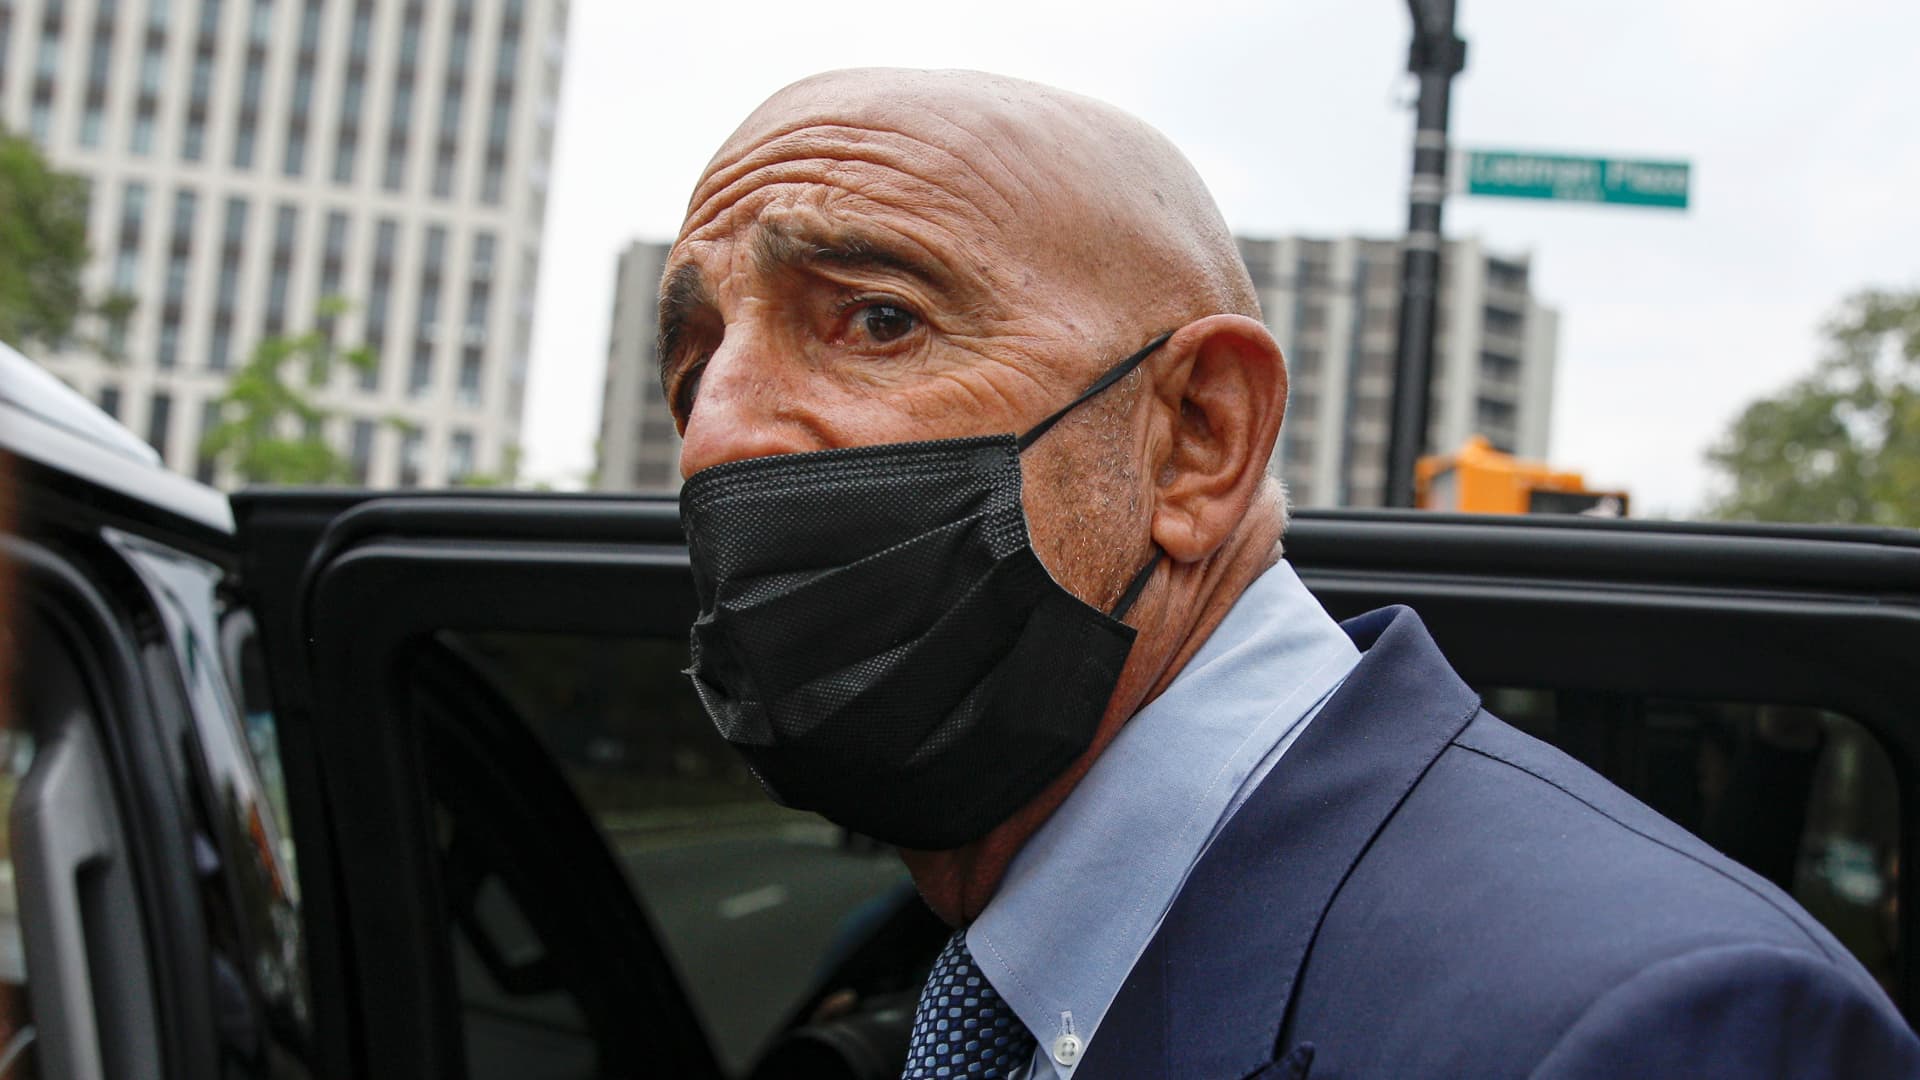 Thomas Barrack, a billionaire friend of Donald Trump who chaired the former president's inaugural fund, exits following his arraignment hearing at the Brooklyn Federal Courthouse in Brooklyn, New York, U.S., July 26, 2021.